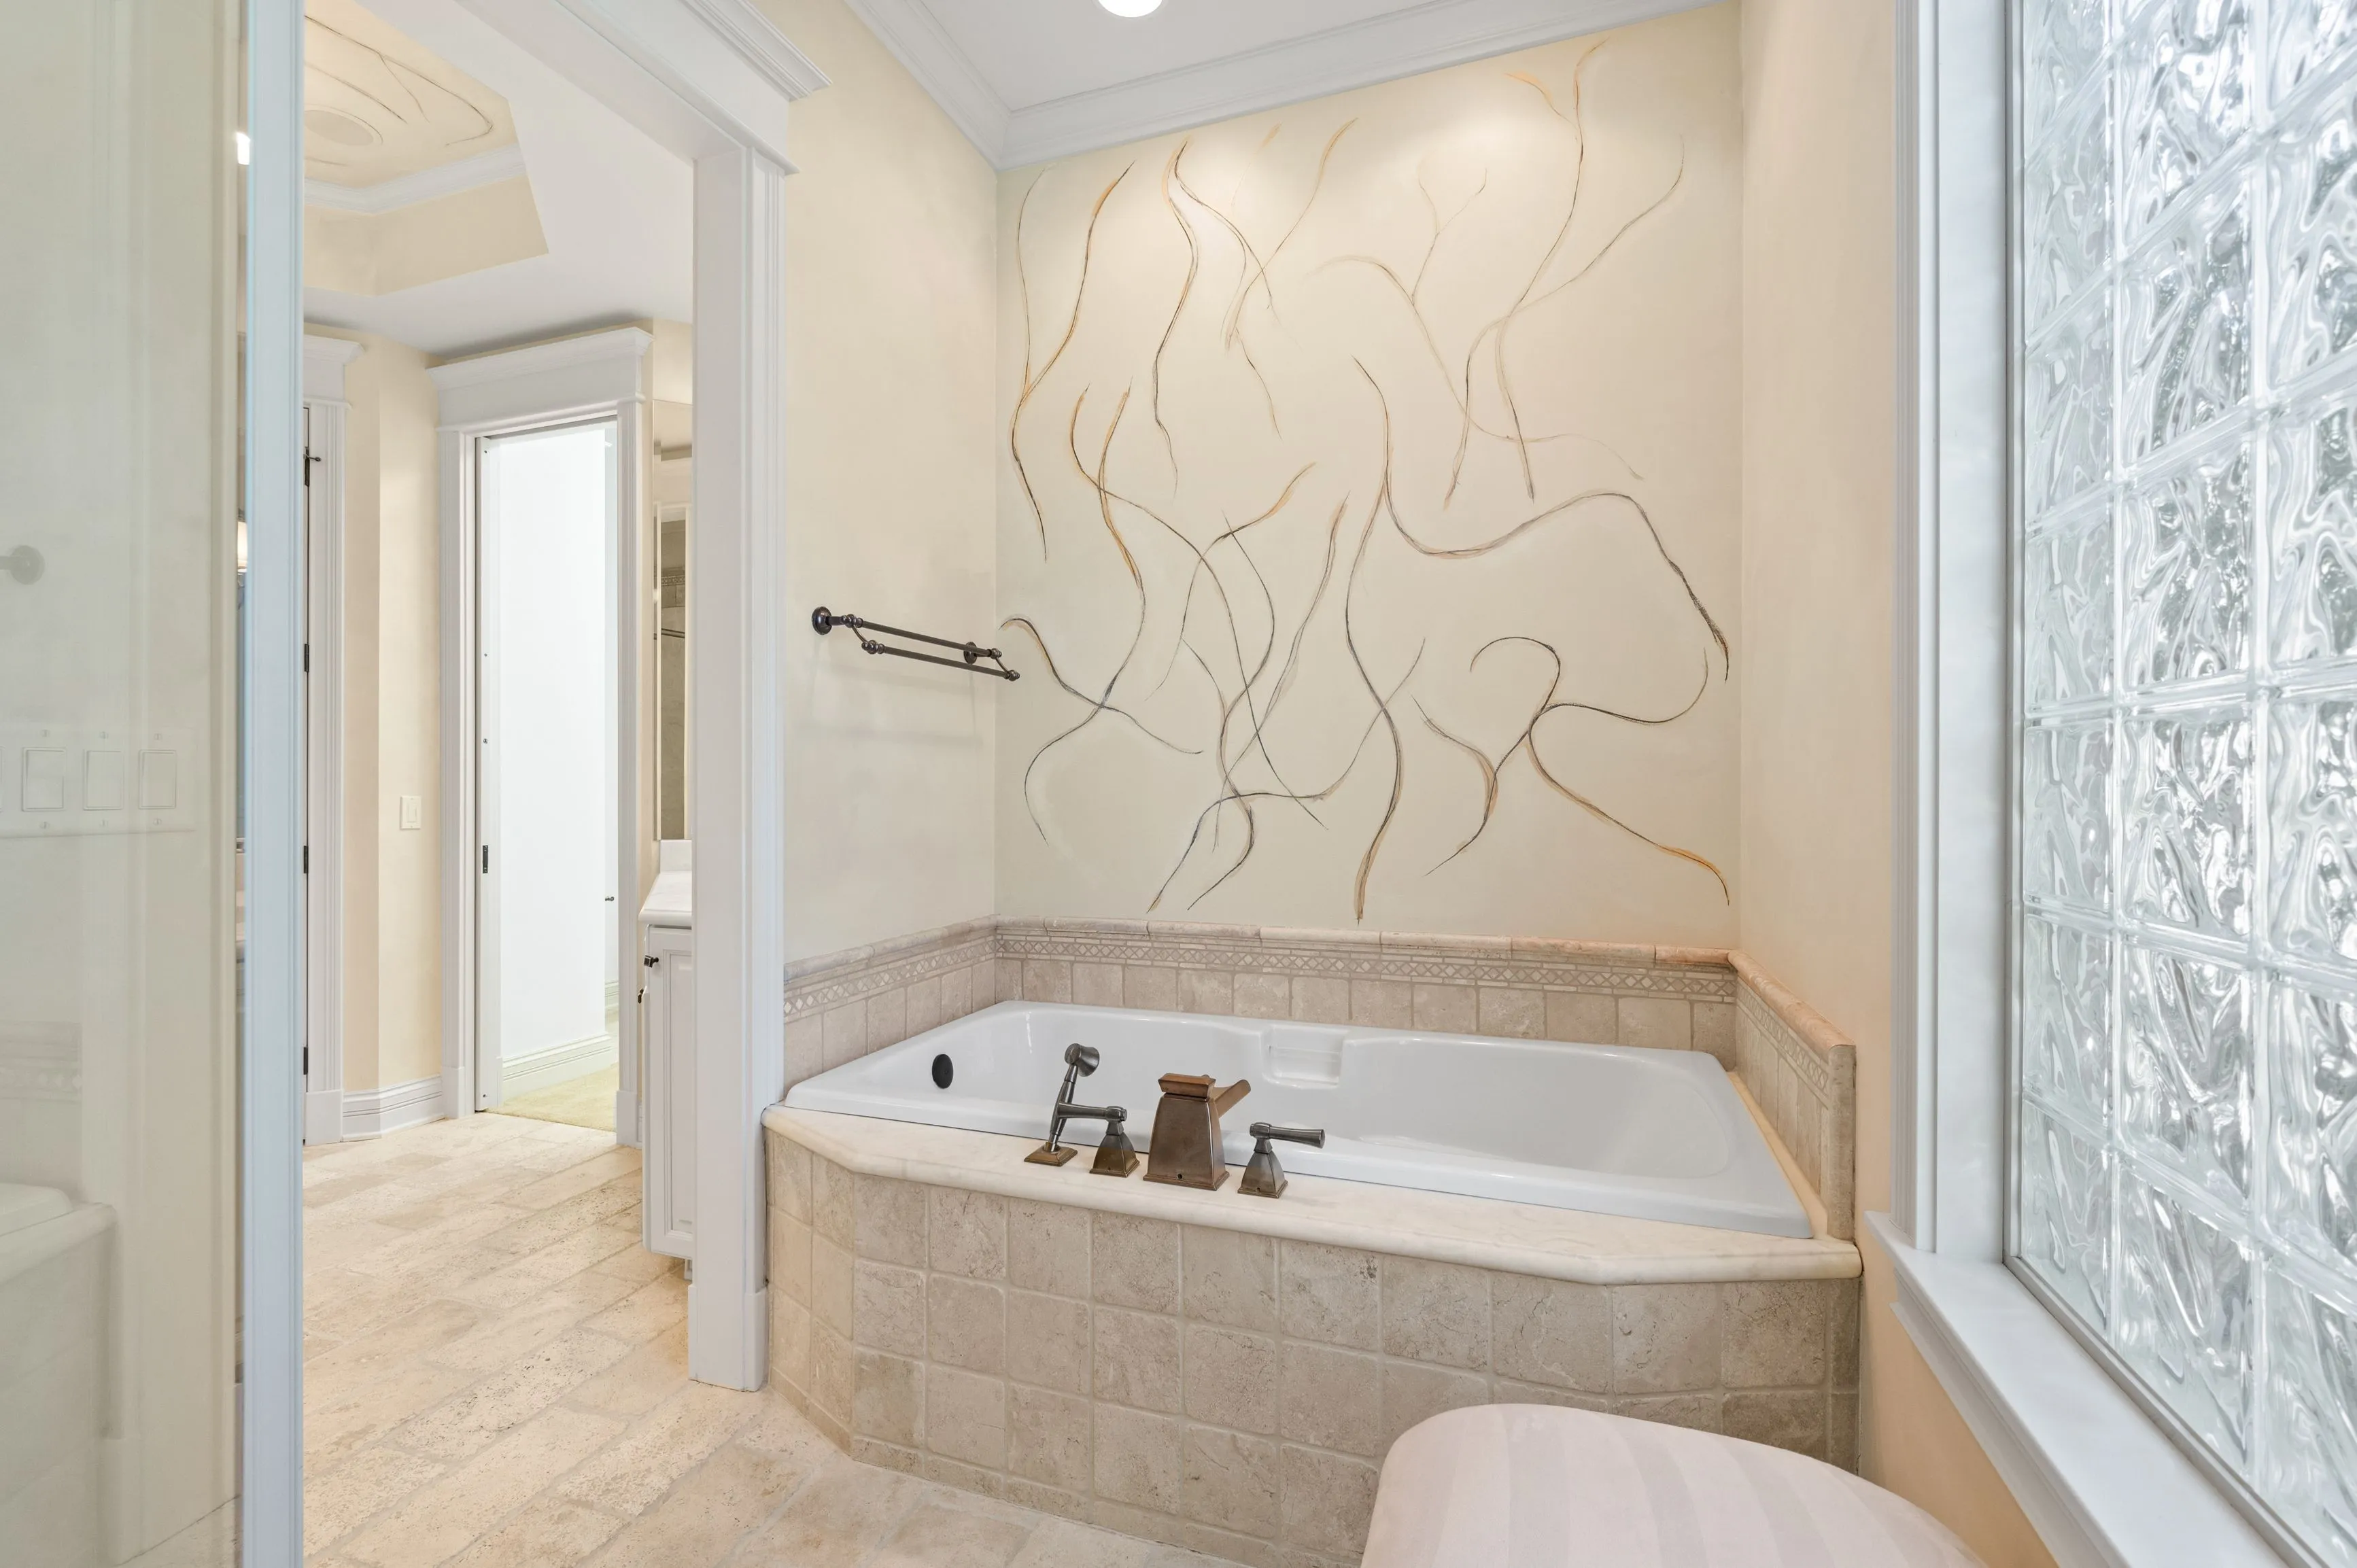 Elegant bathroom interior featuring a corner bathtub with decorative beige tiles, an artistic wall mural, glass block window, and a separate shower area with glass door.